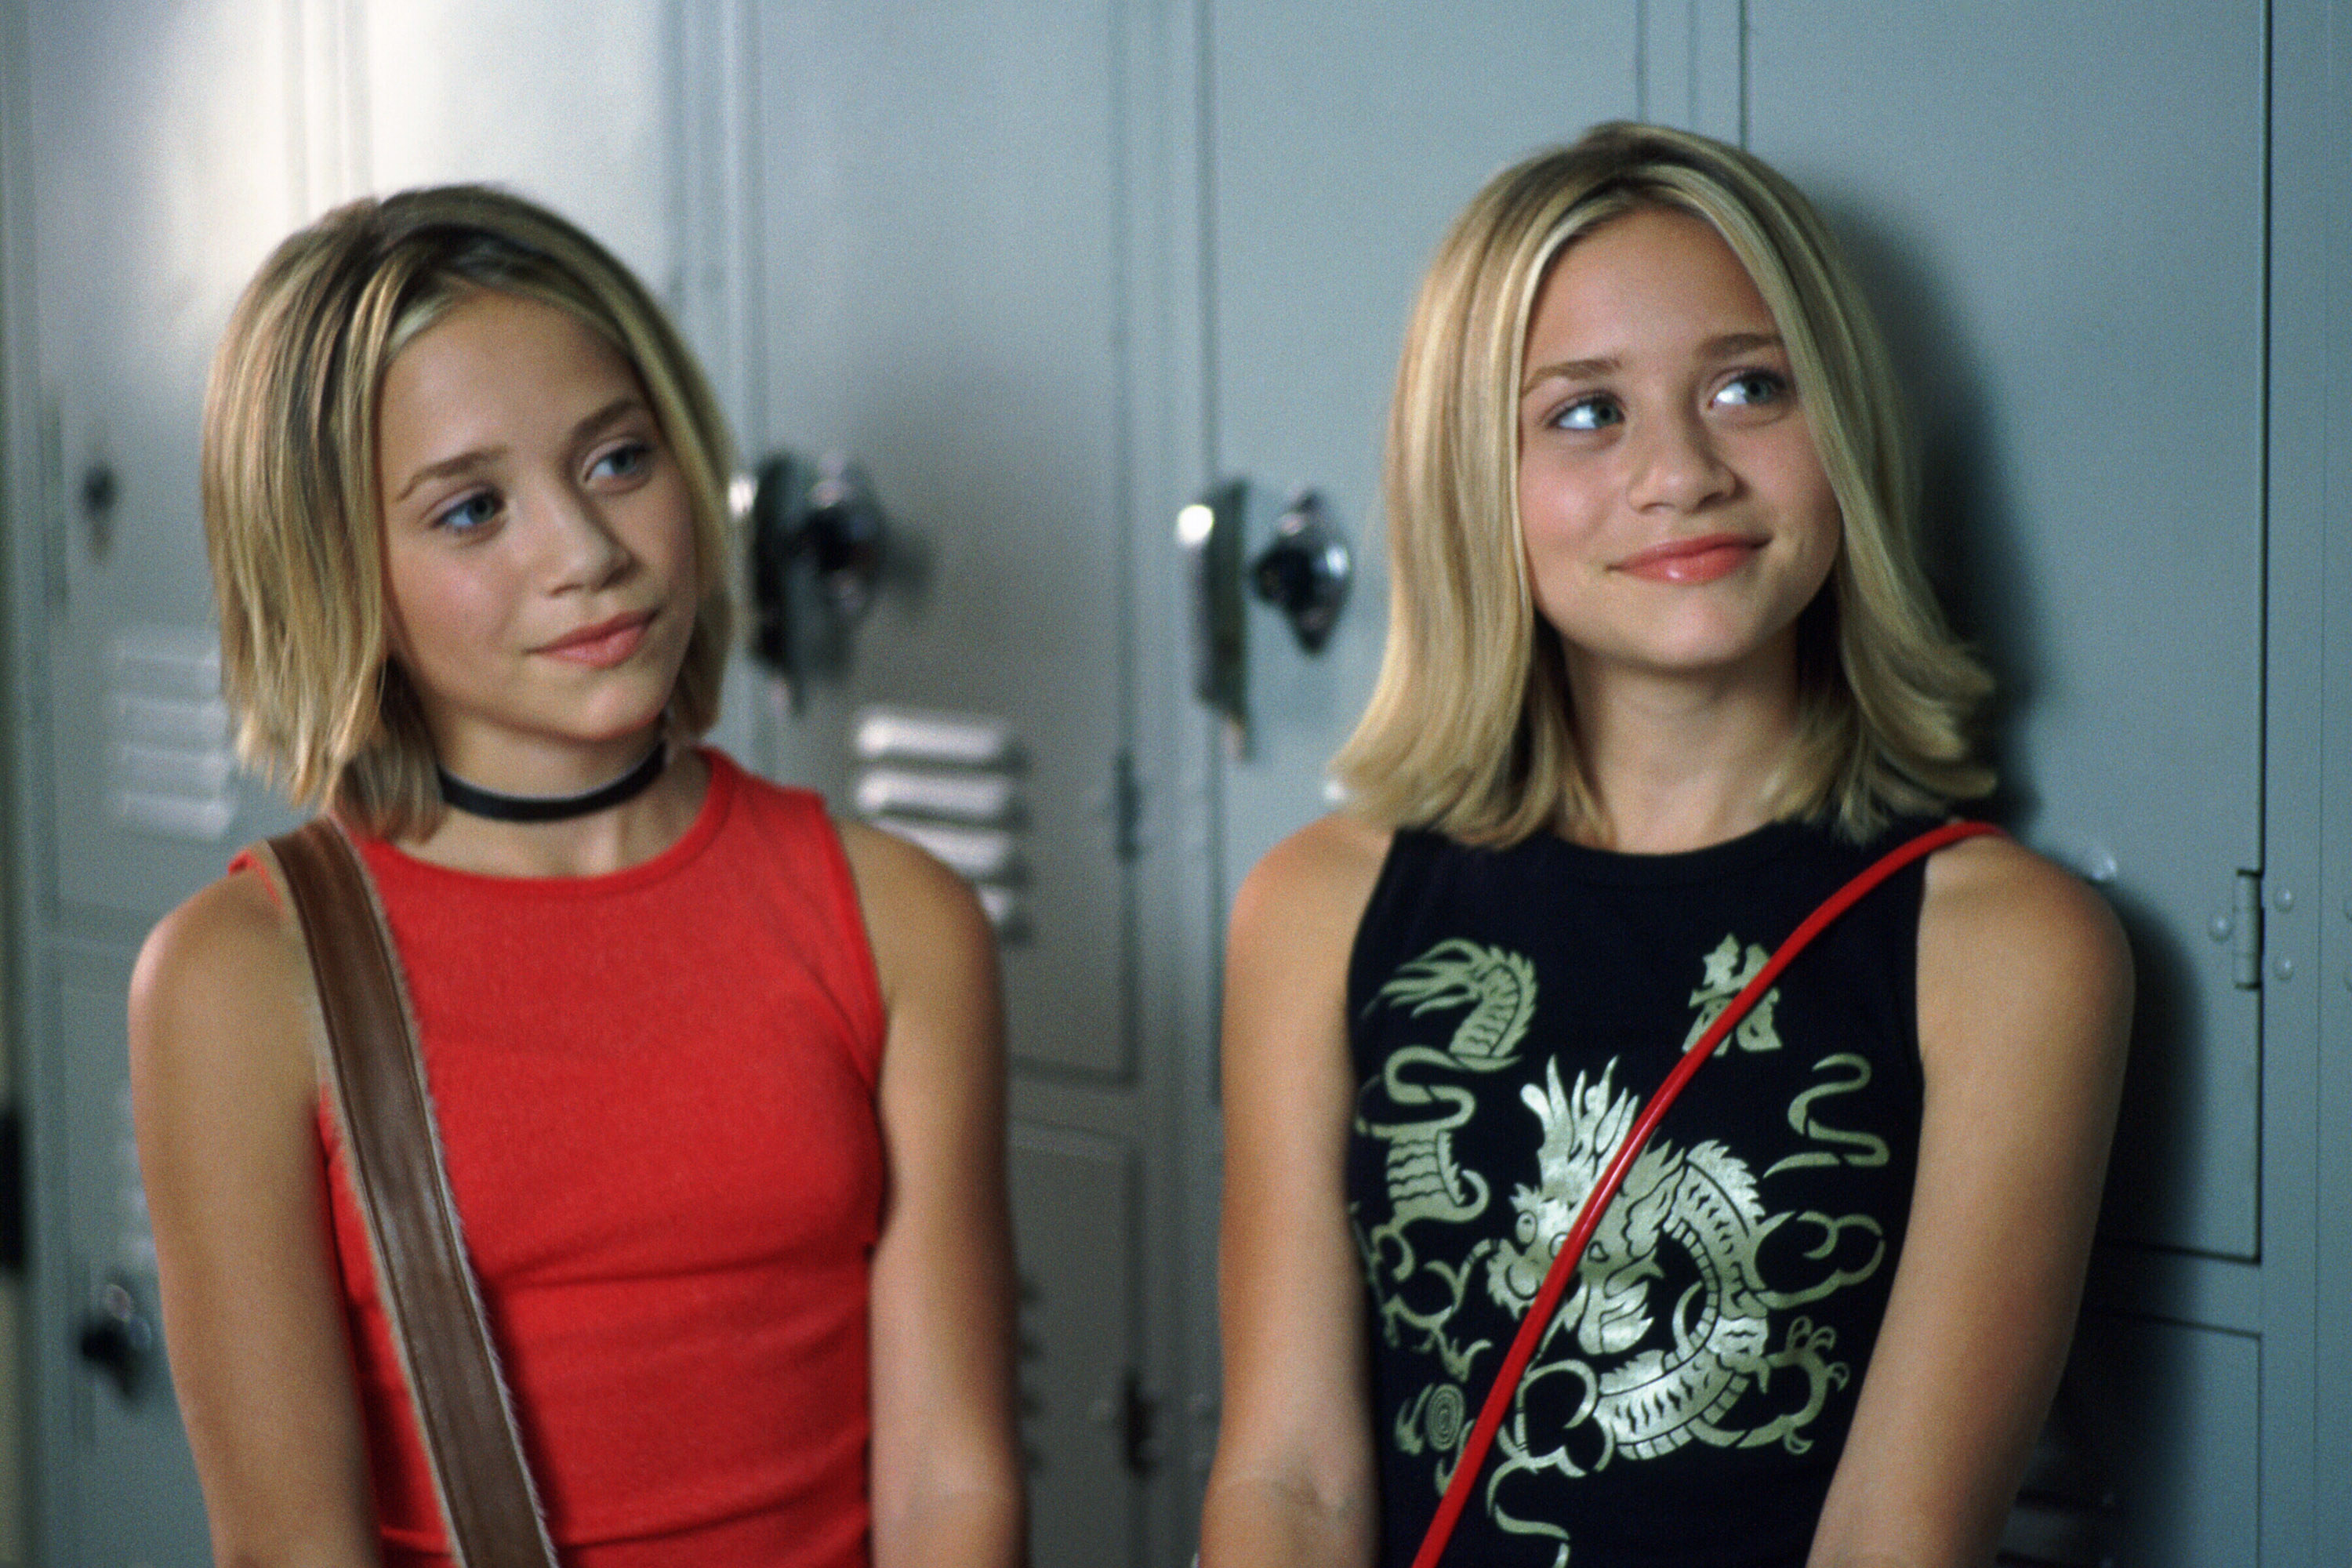 The Olsen sisters are young girls standing in front of school lockers